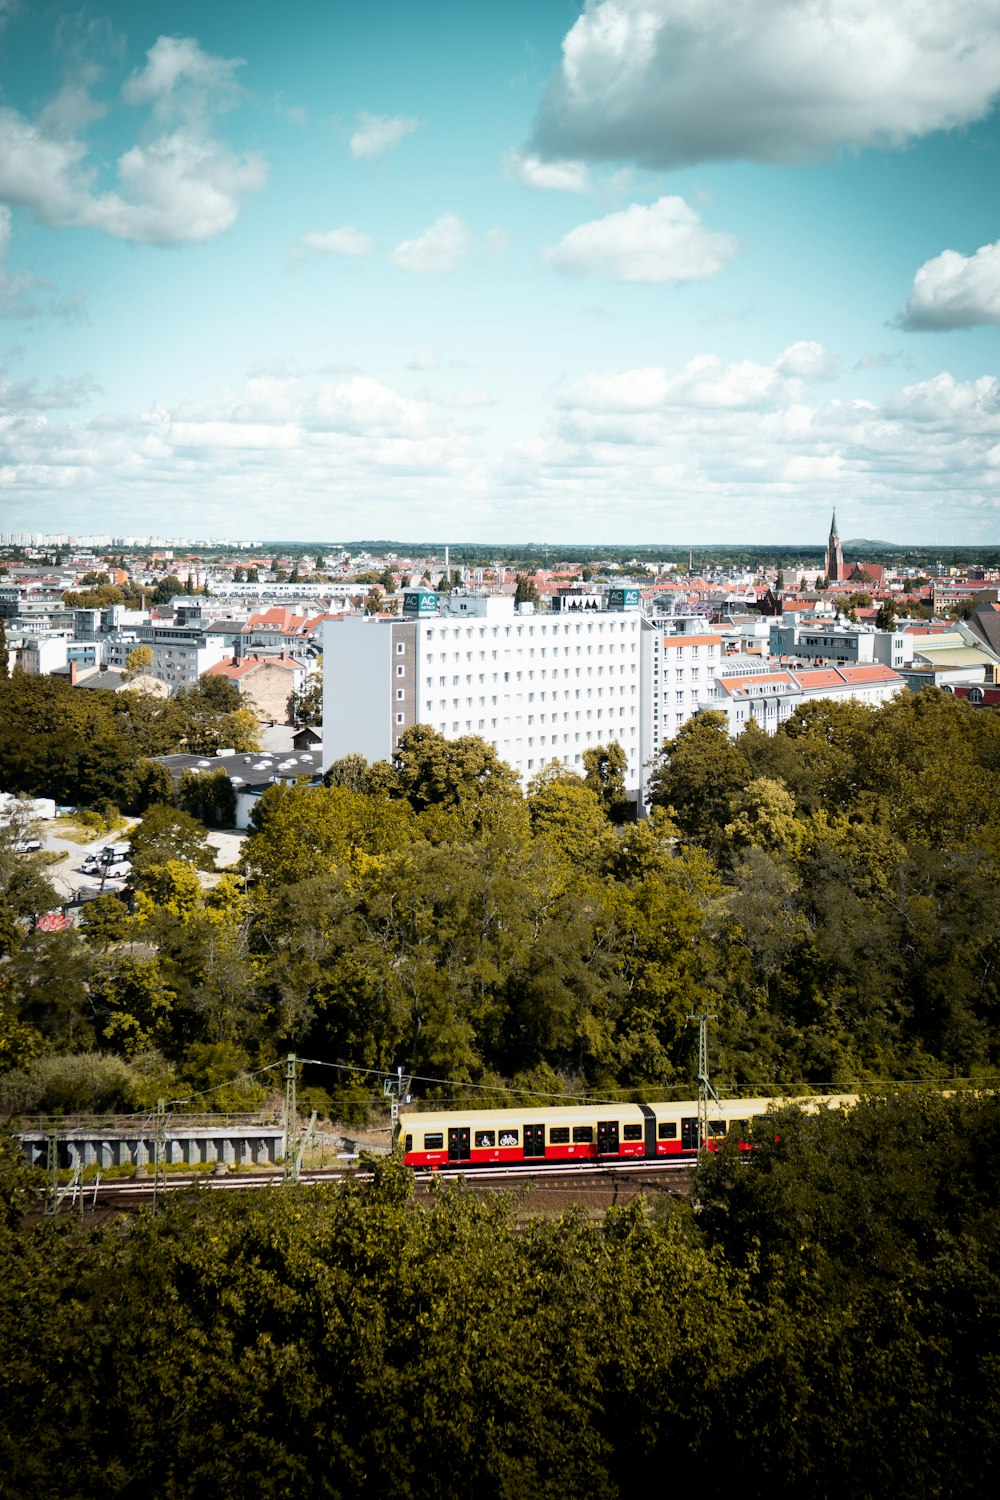 white and red train on rail near city buildings during daytime